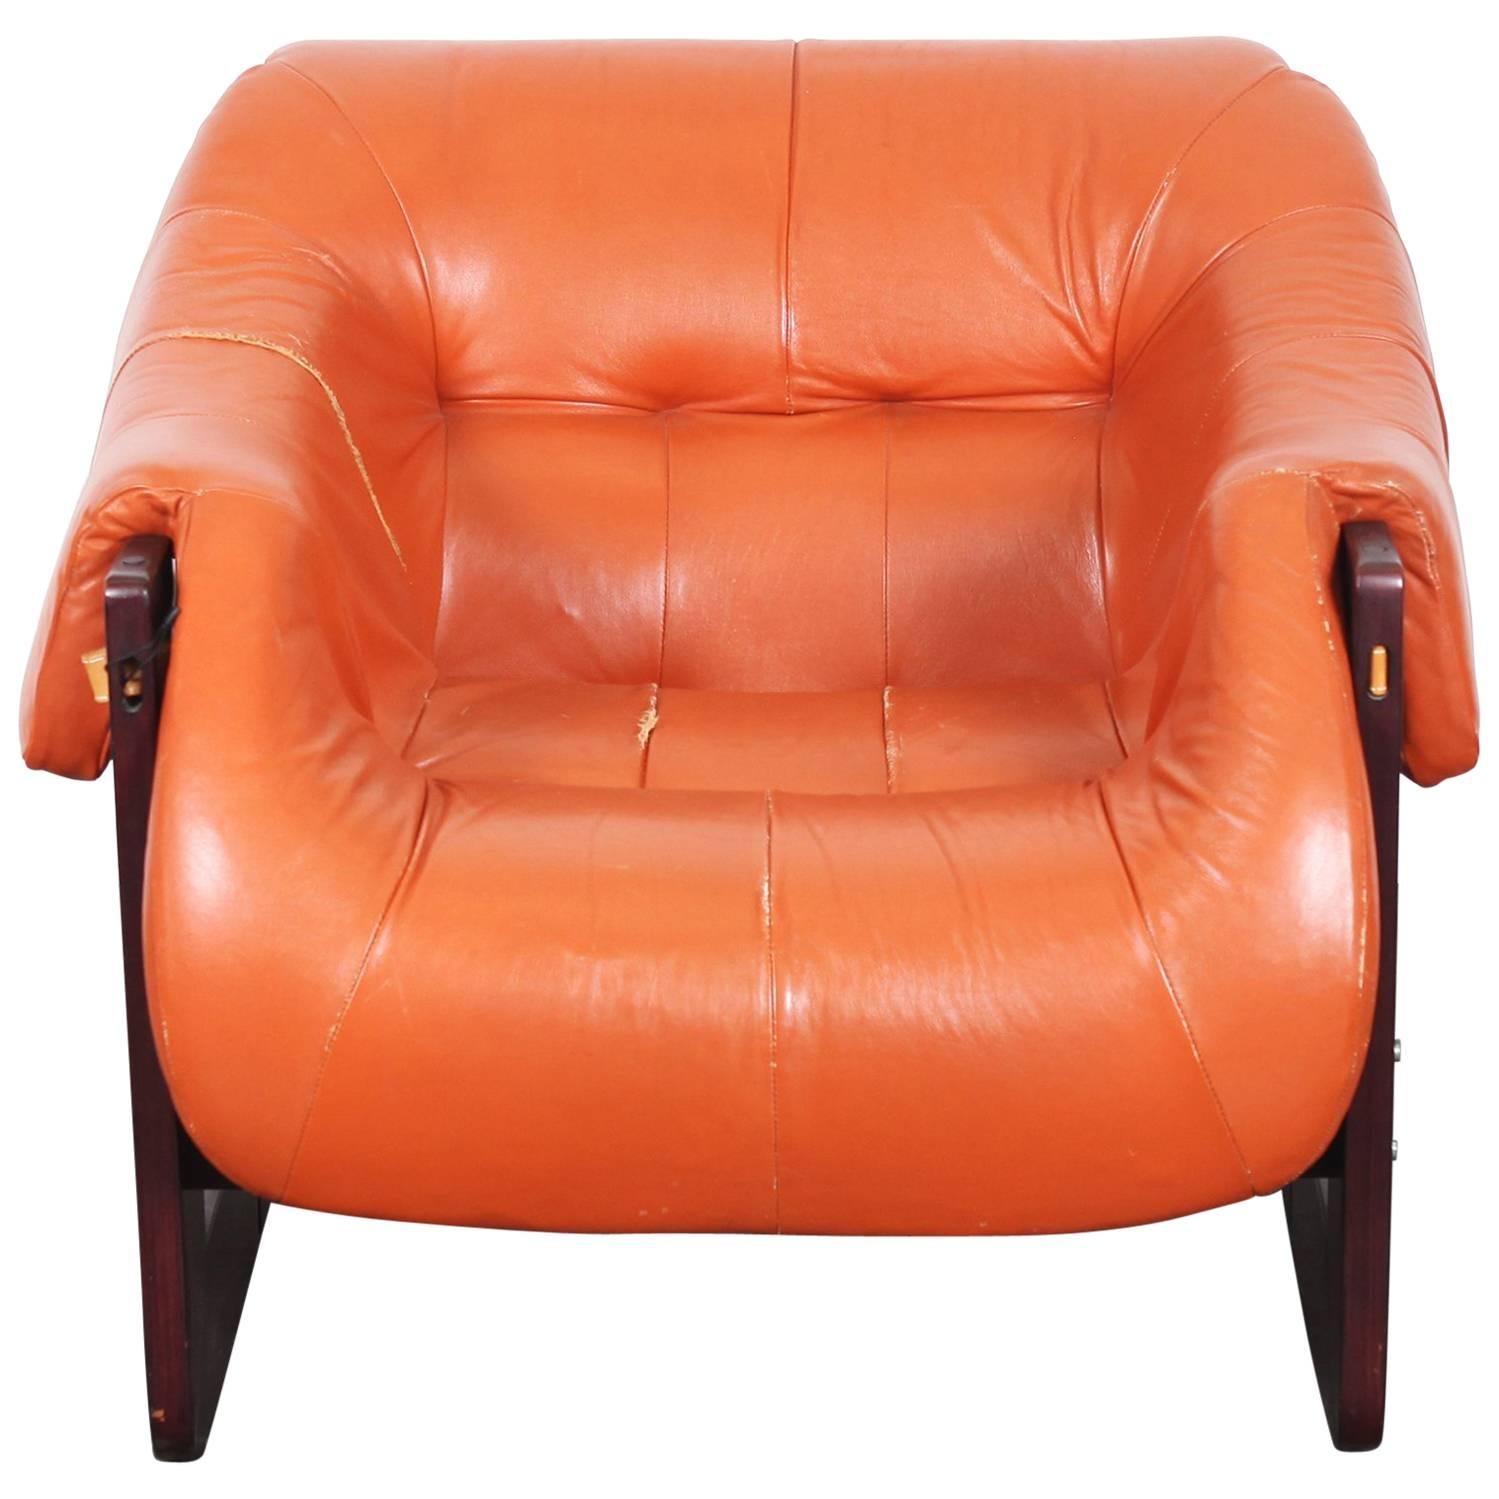 Mid-Century Modern lounge chair by Percival Lafer with Brazilian rosewood and original vintage leather. Really unique design and construction make this a true statement piece. Matching sofa and additional lounge chair with ottoman is available.